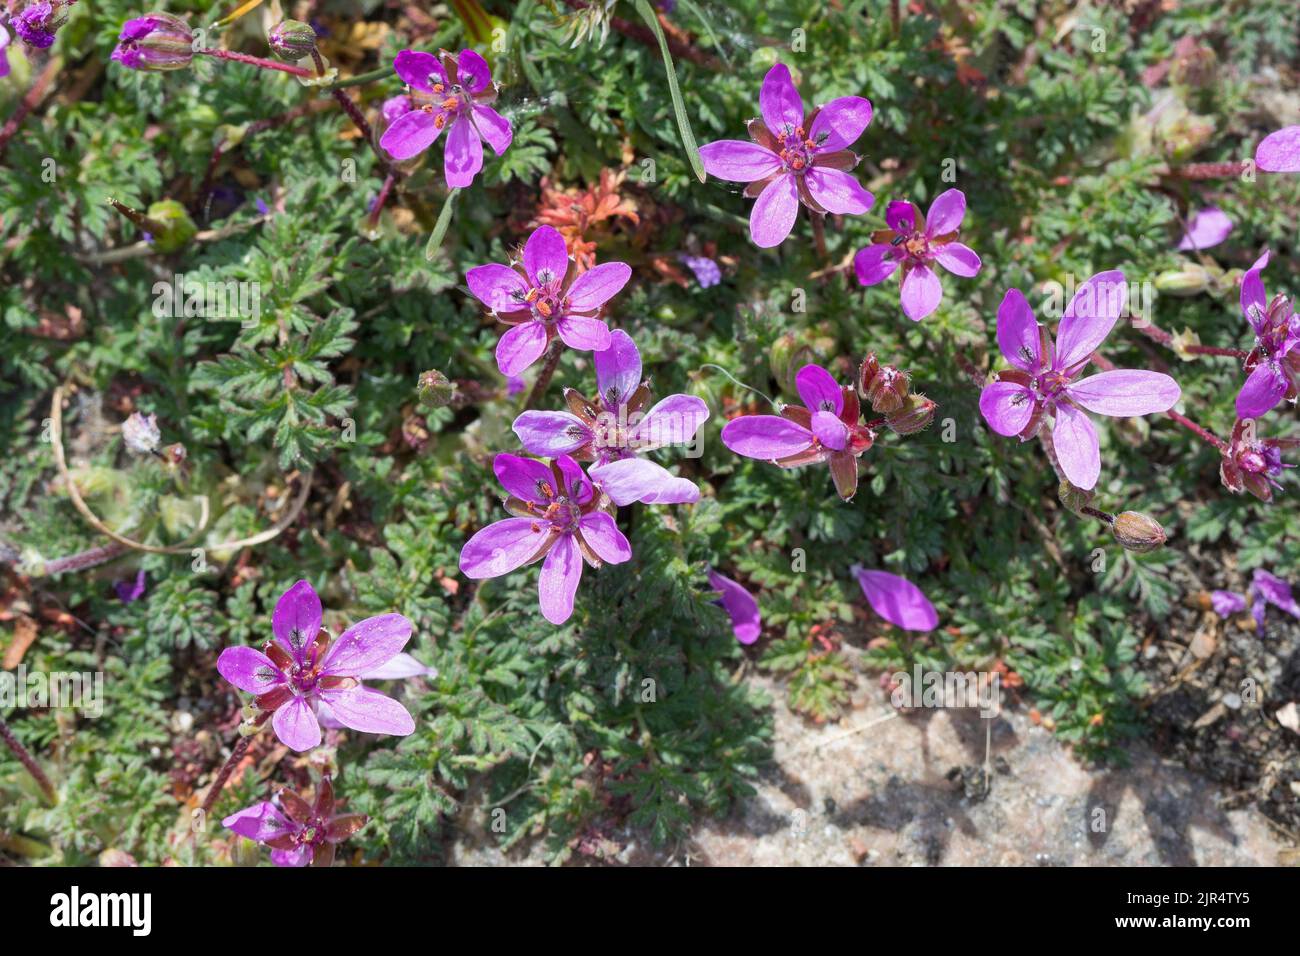 common stork's-bill, red-stemmed filaree, pin clover (Erodium cicutarium), grows in paving gaps, Germany Stock Photo